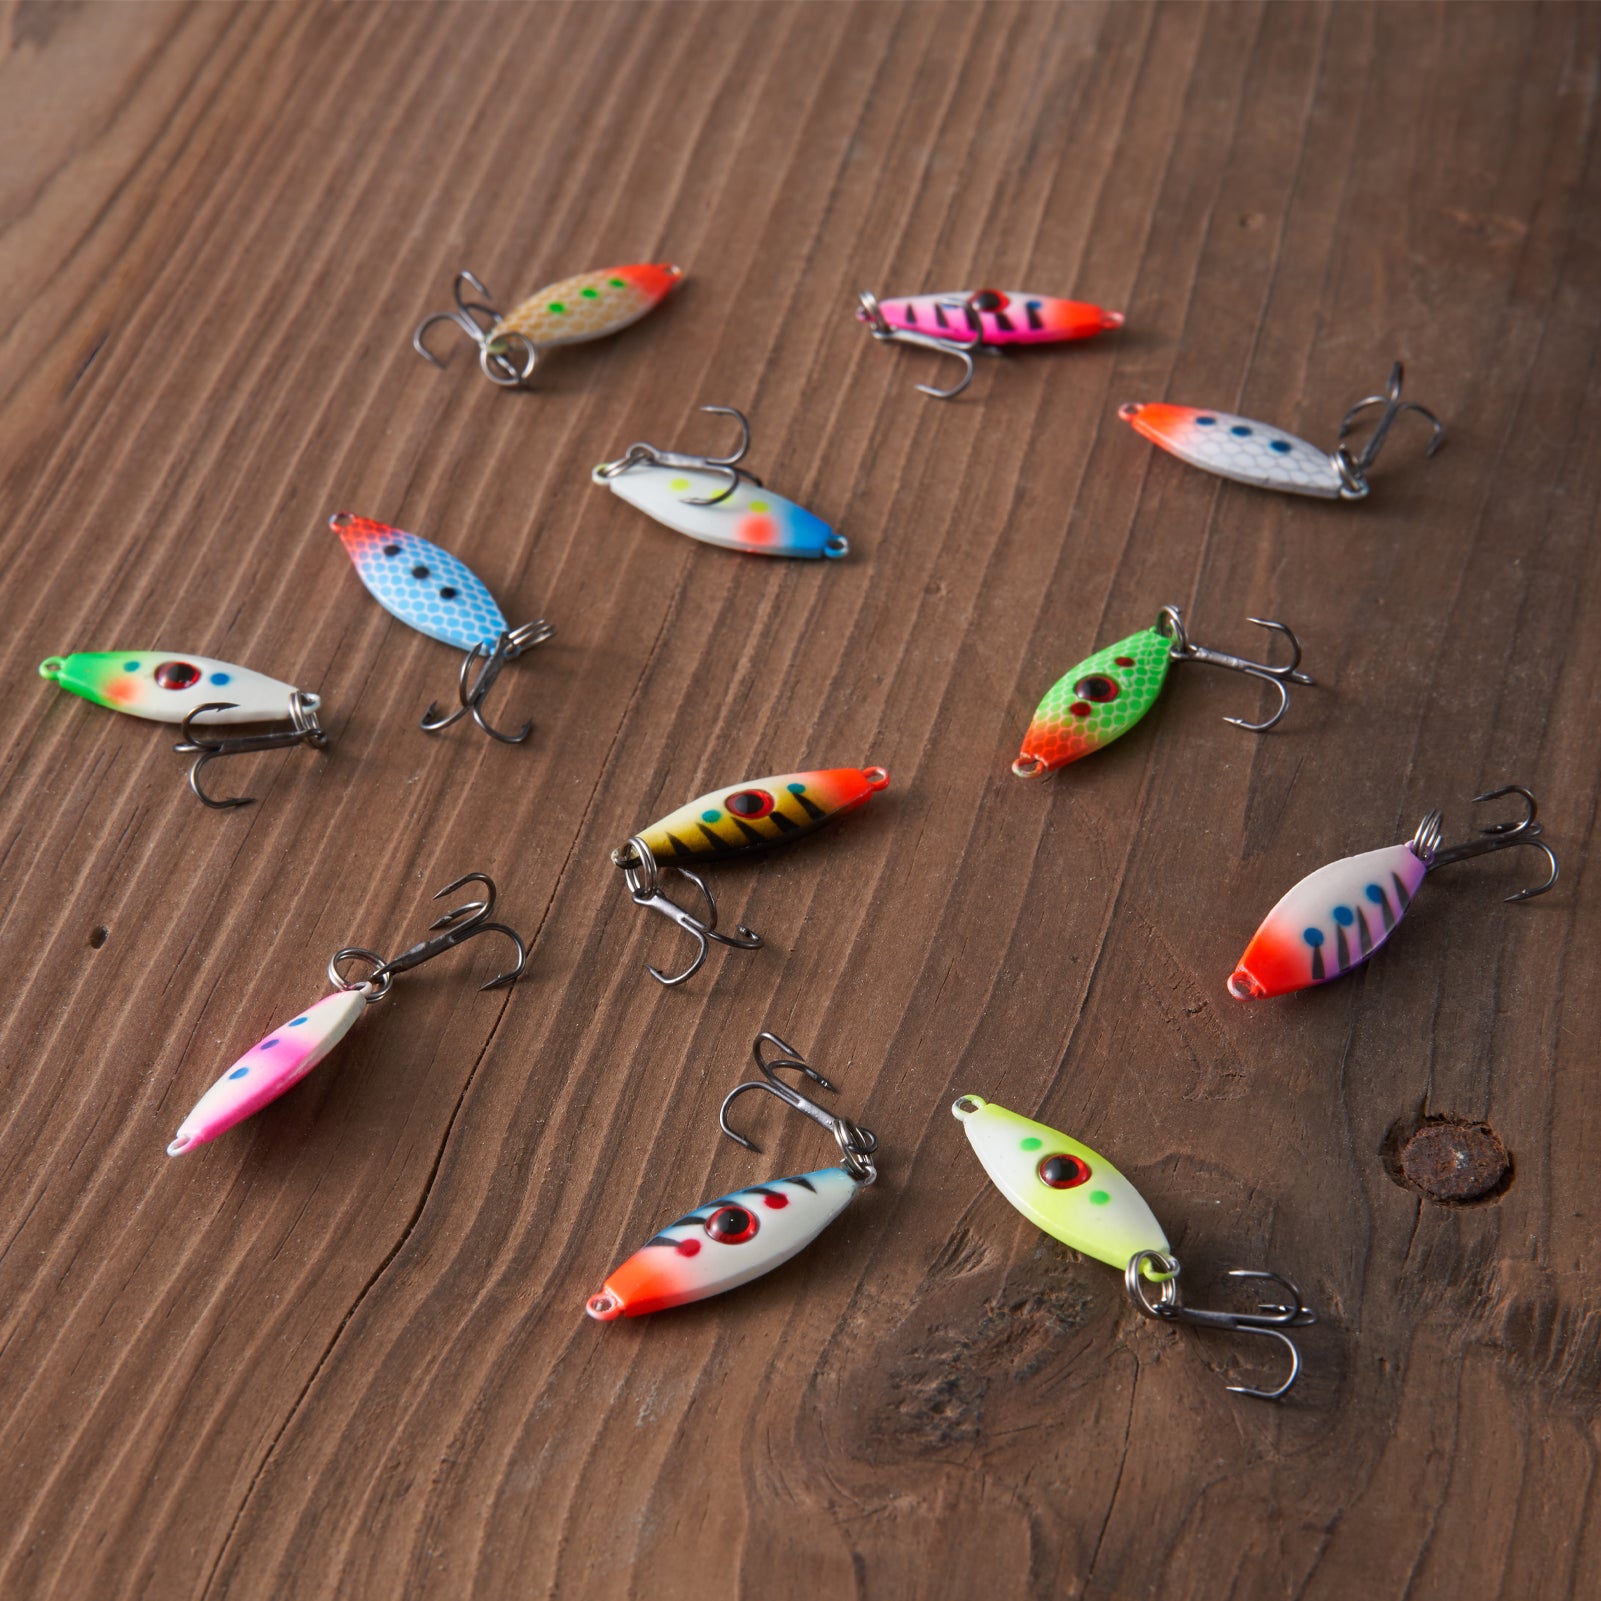 How to - Airbrush a Lure (Pike lure) 